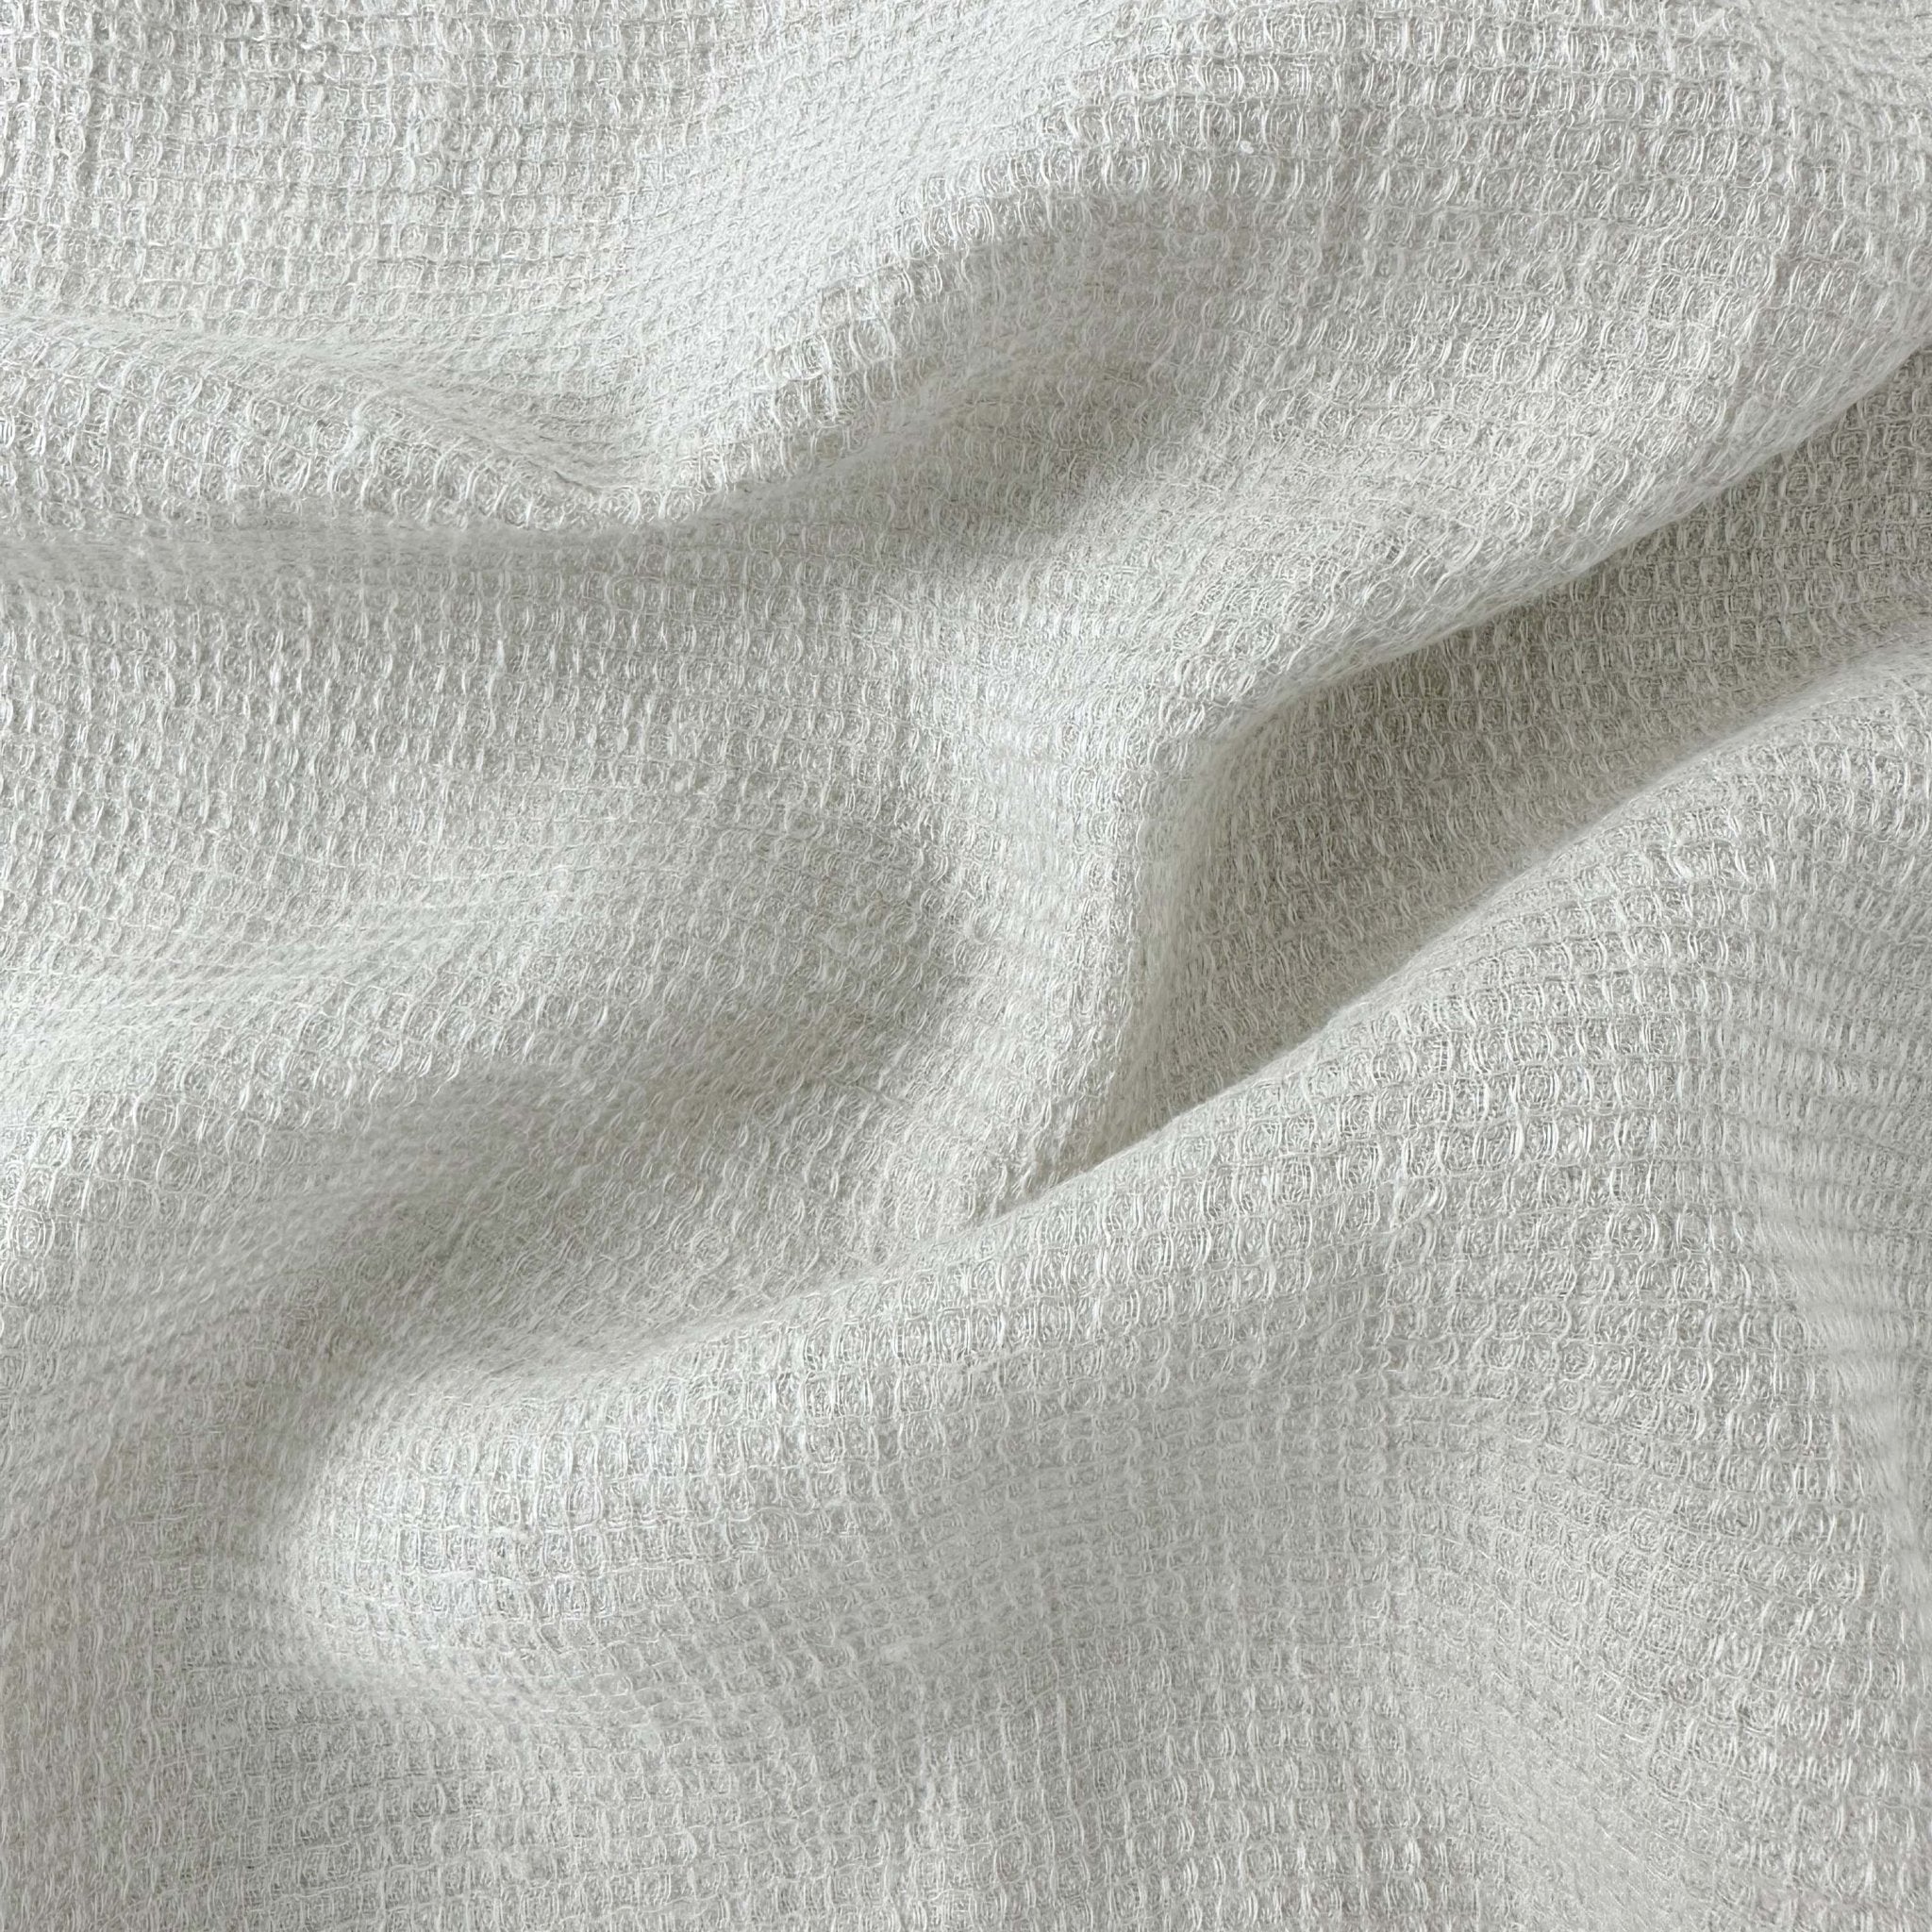 Linen Waffle Tweed Fabric 7349 7350 - The Linen Lab - White